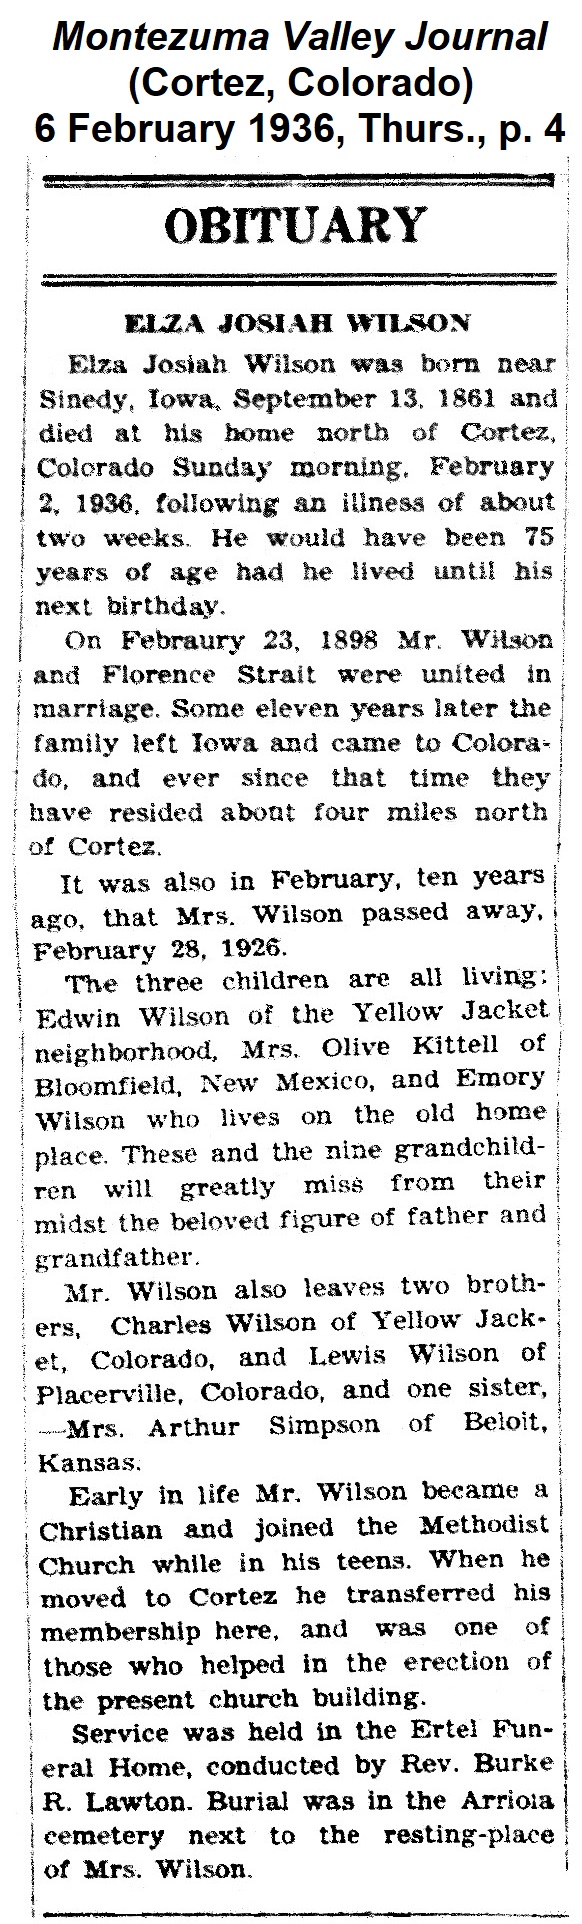 Image of obituary for Elza Josiah
                Wilson from the Montezuma Valley Journal of 6 February 1936